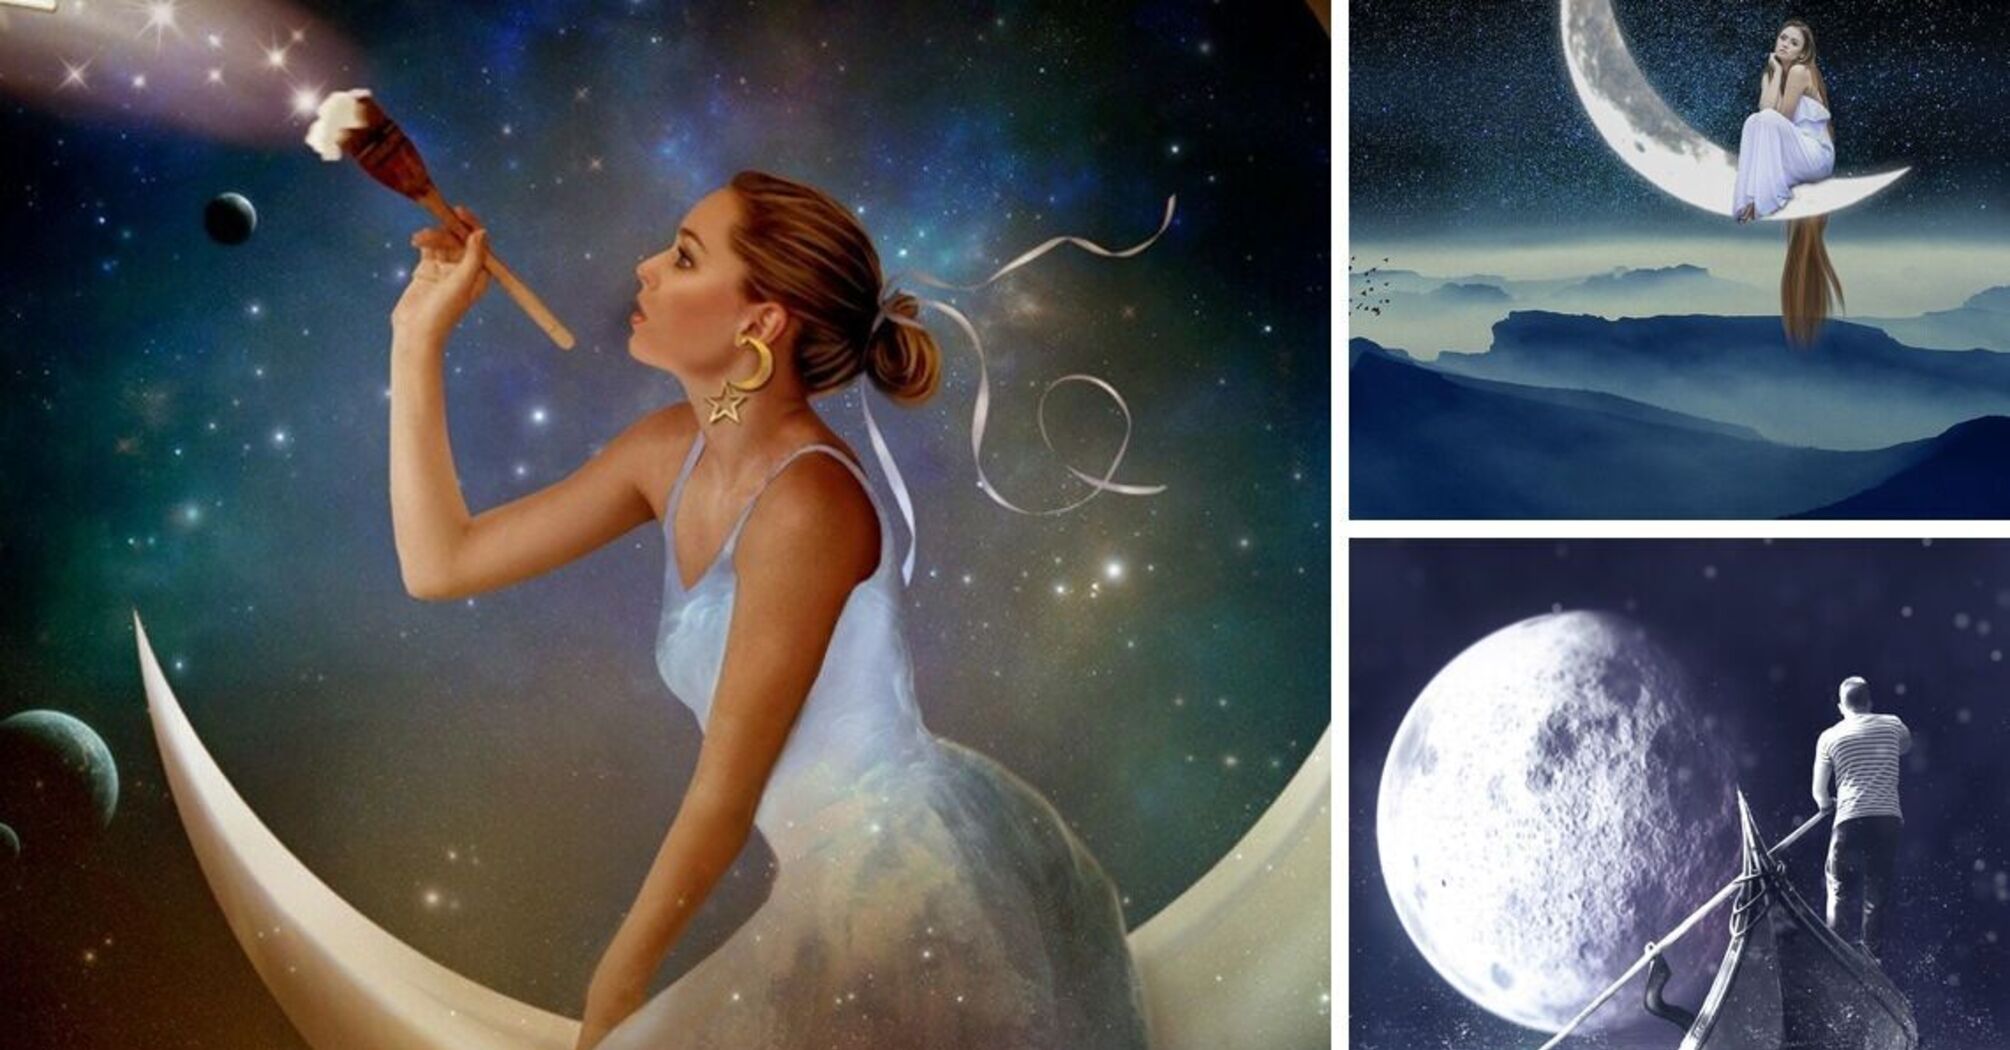 April 11 will turn the lives of four zodiac signs upside down: here's who's on the list